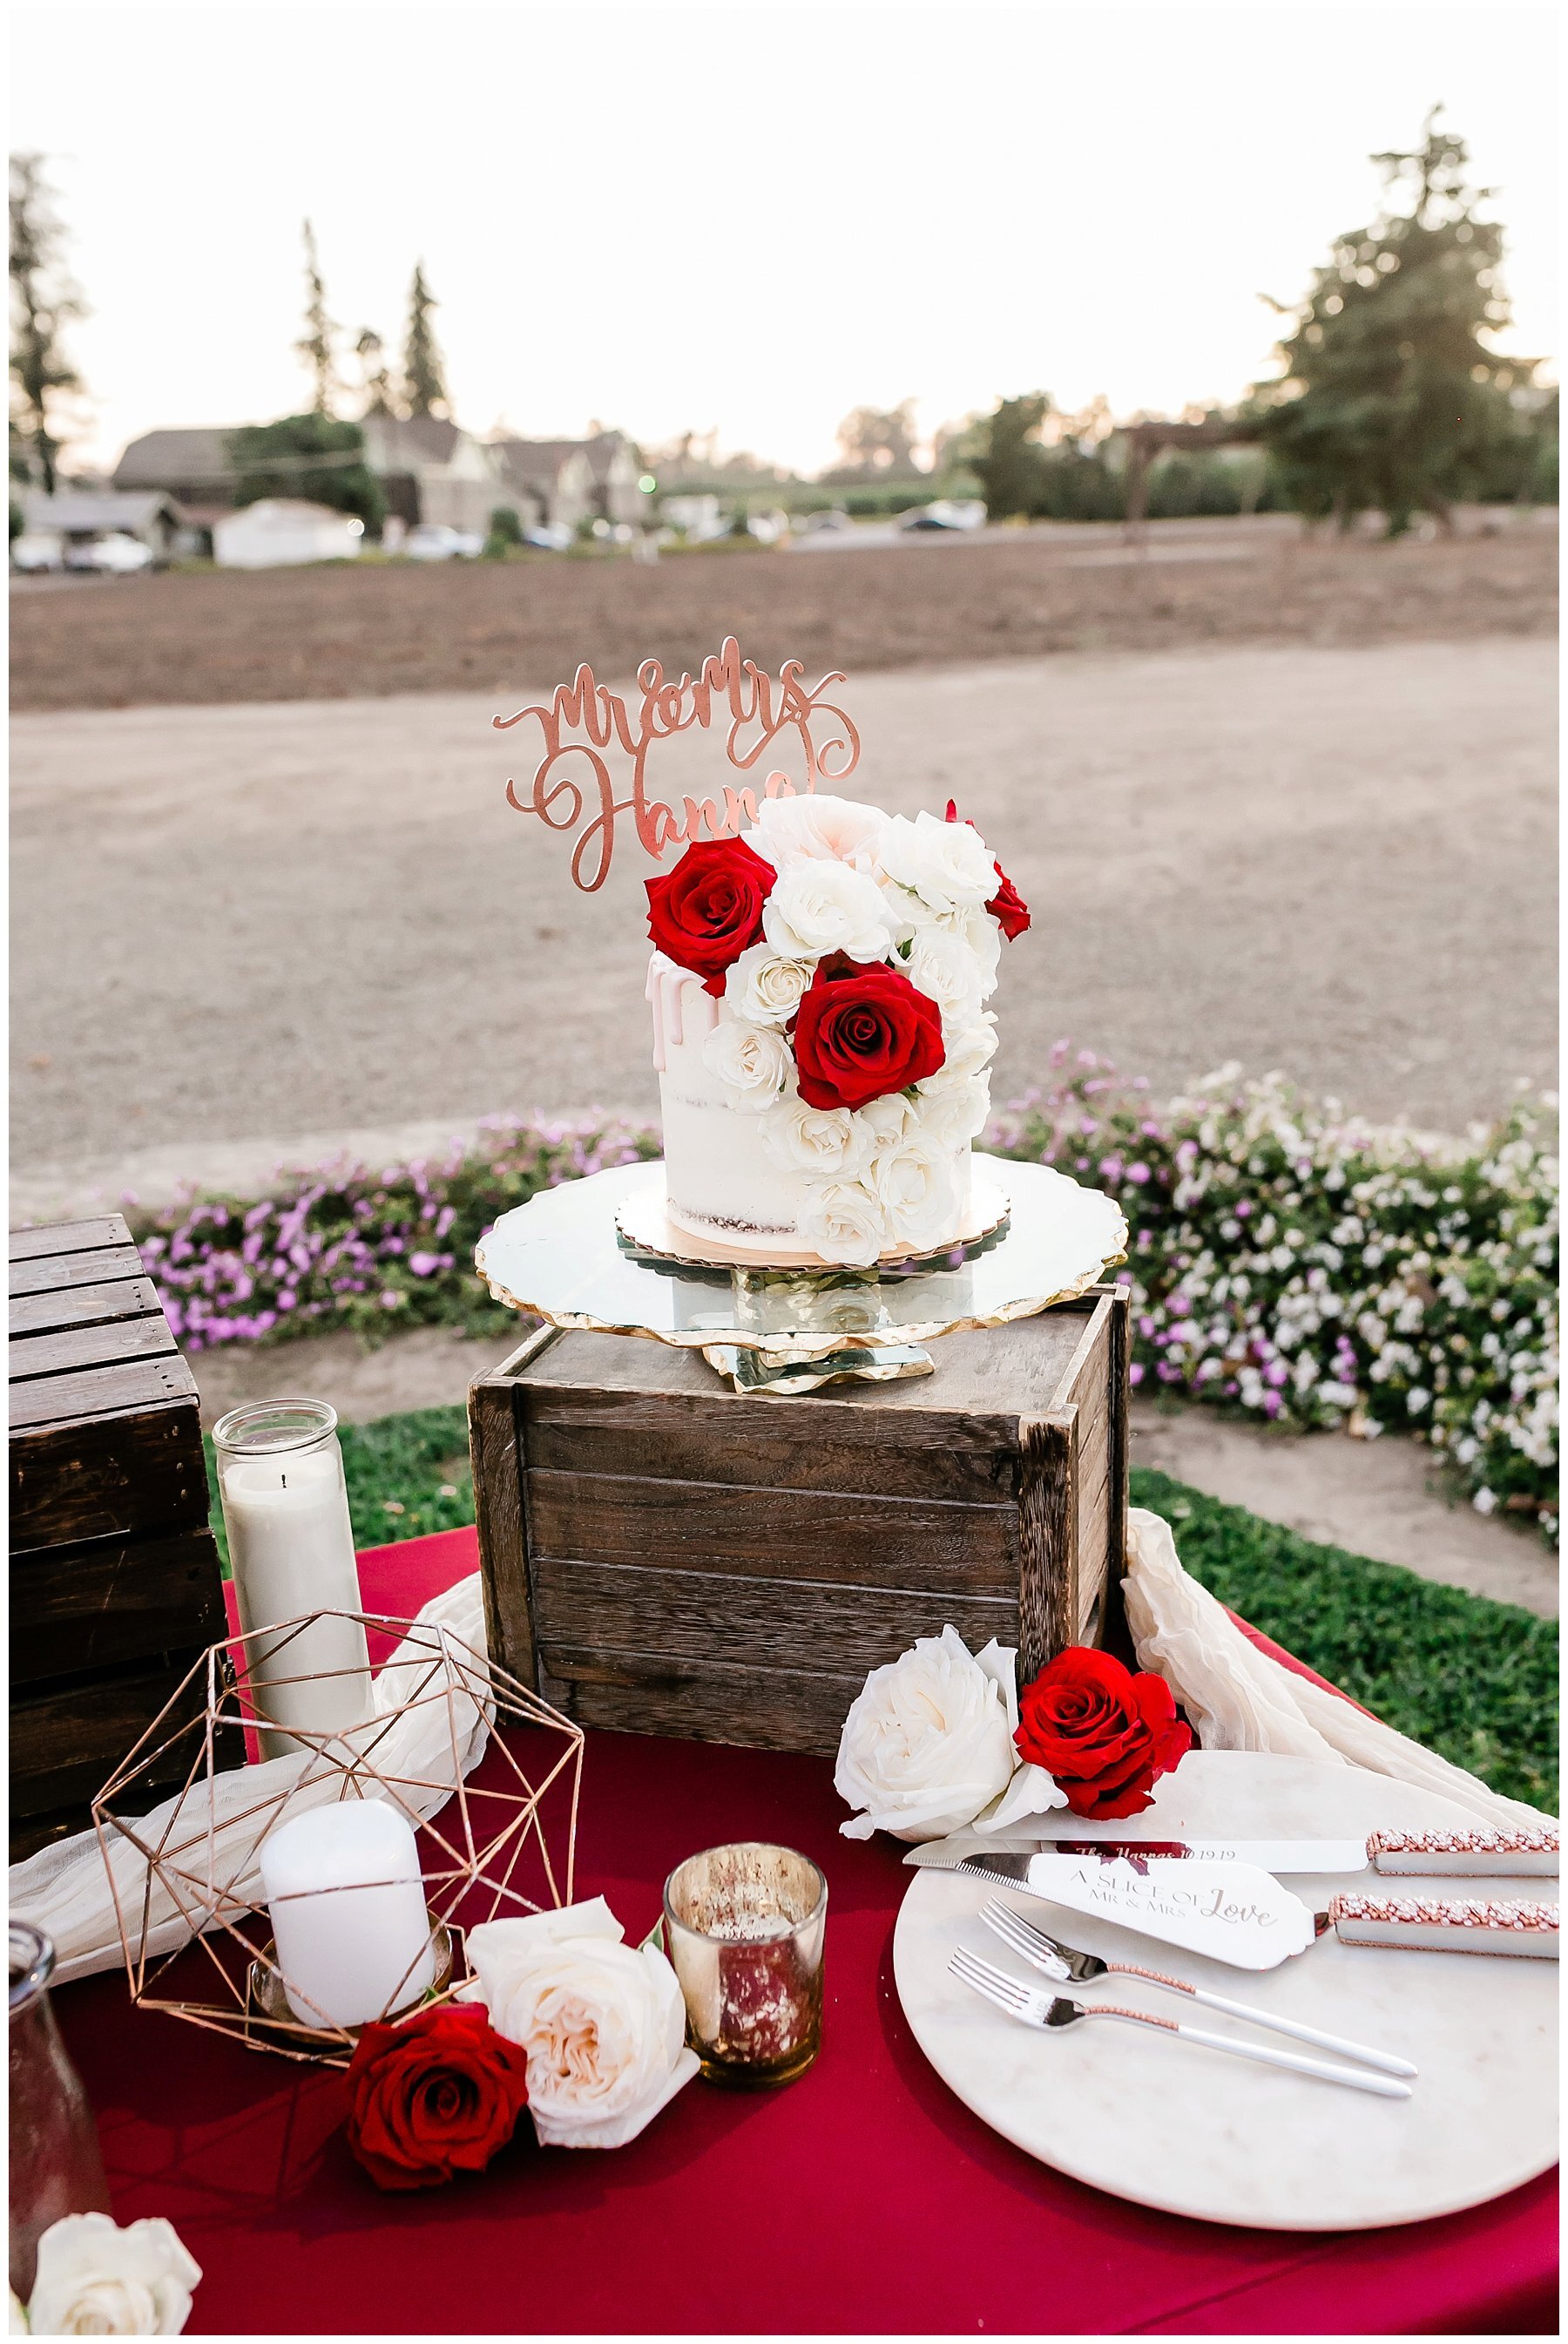  white wedding cake with red flowers and decor 